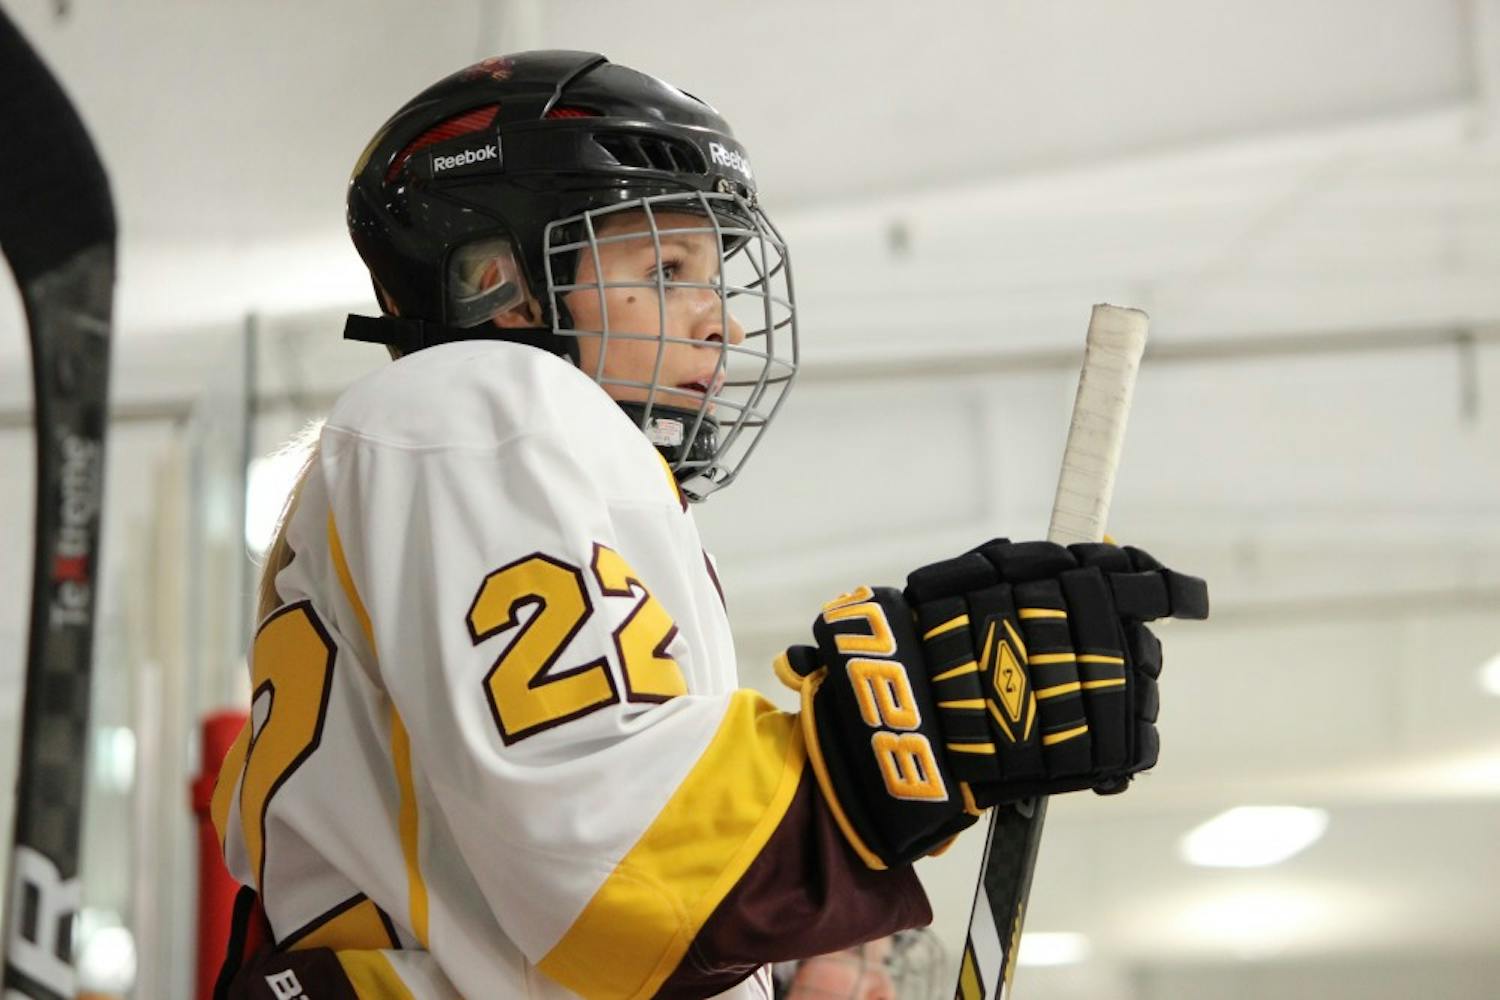 ASU women's hockey junior forward Amber Galles looks on from the bench during a game against the Anaheim Lady Ducks at Oceanside Ice Arena on Sept. 24, 2016.